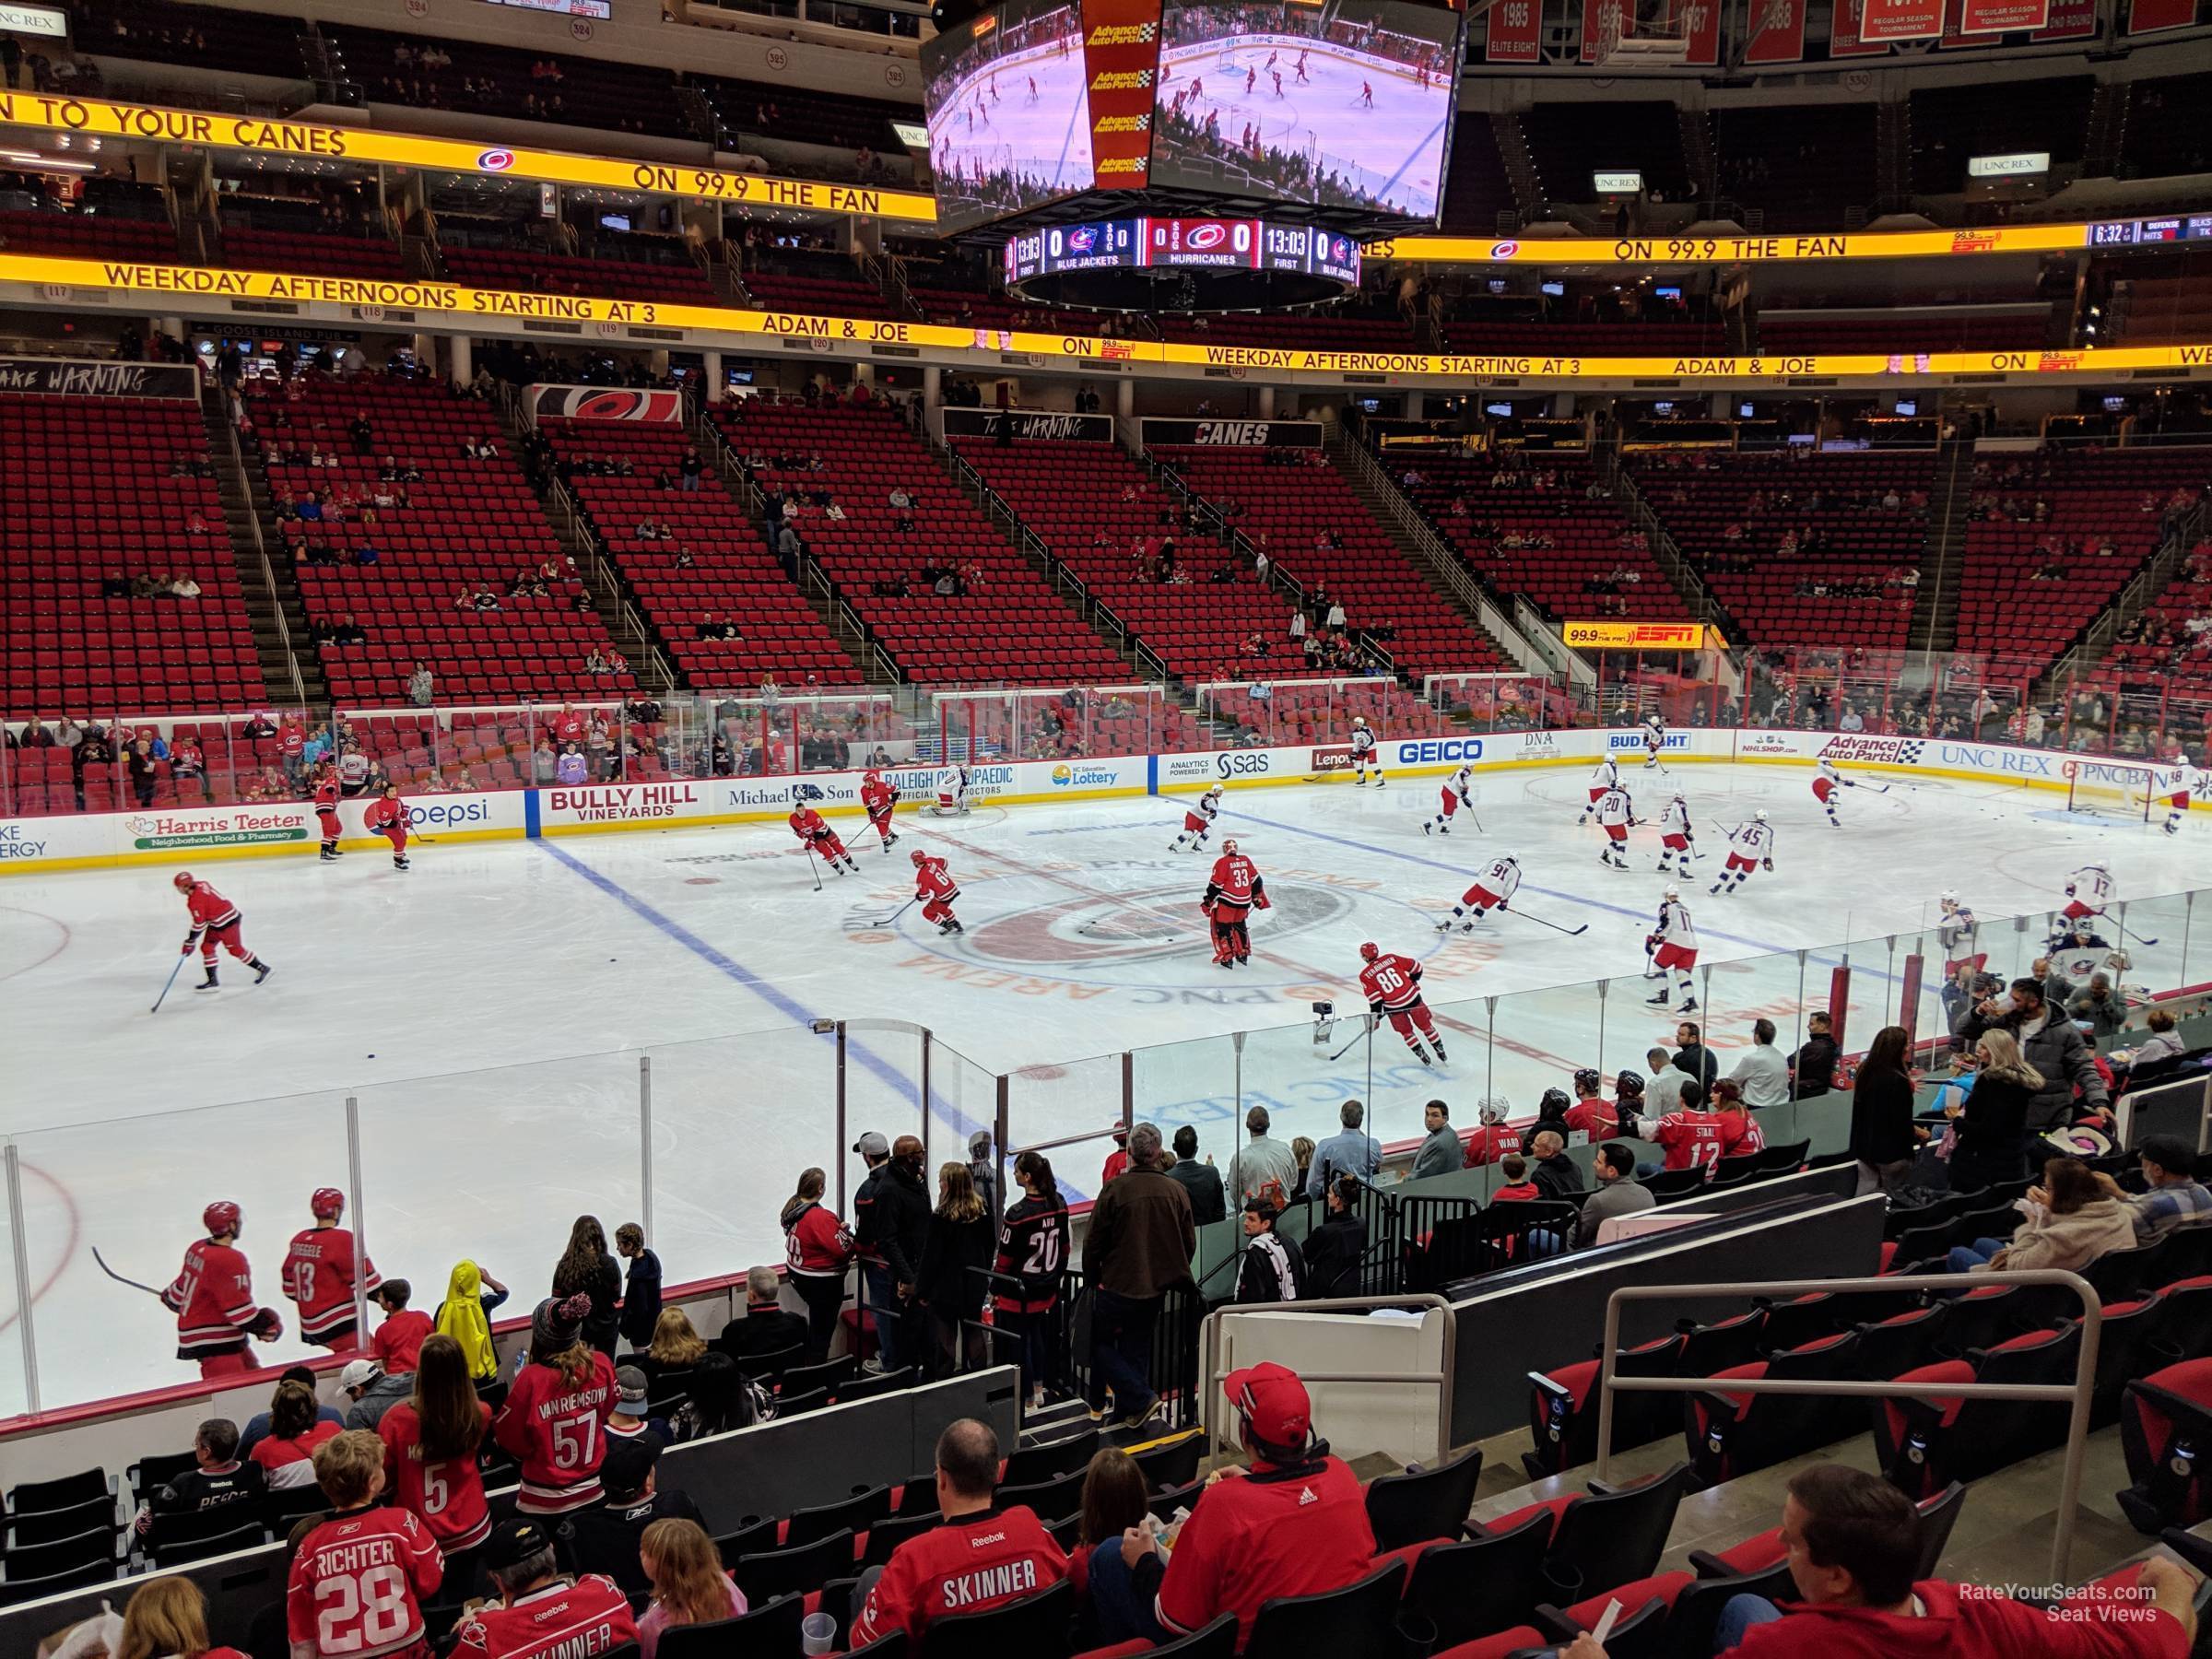 section 106, row q seat view  for hockey - pnc arena